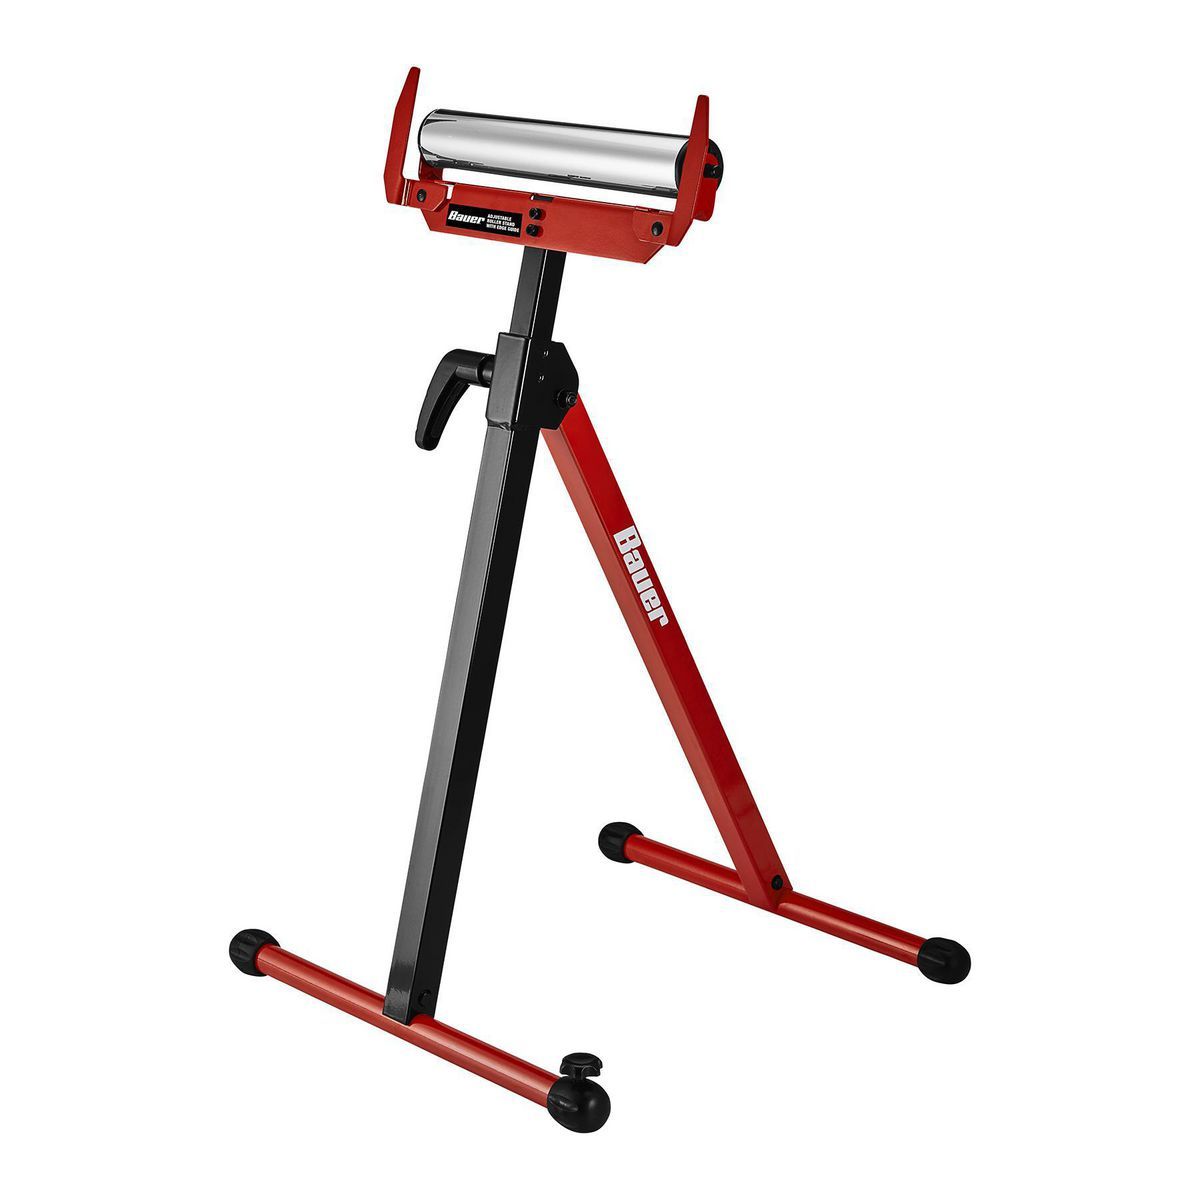 Adjustable Roller Stand with Edge Guide